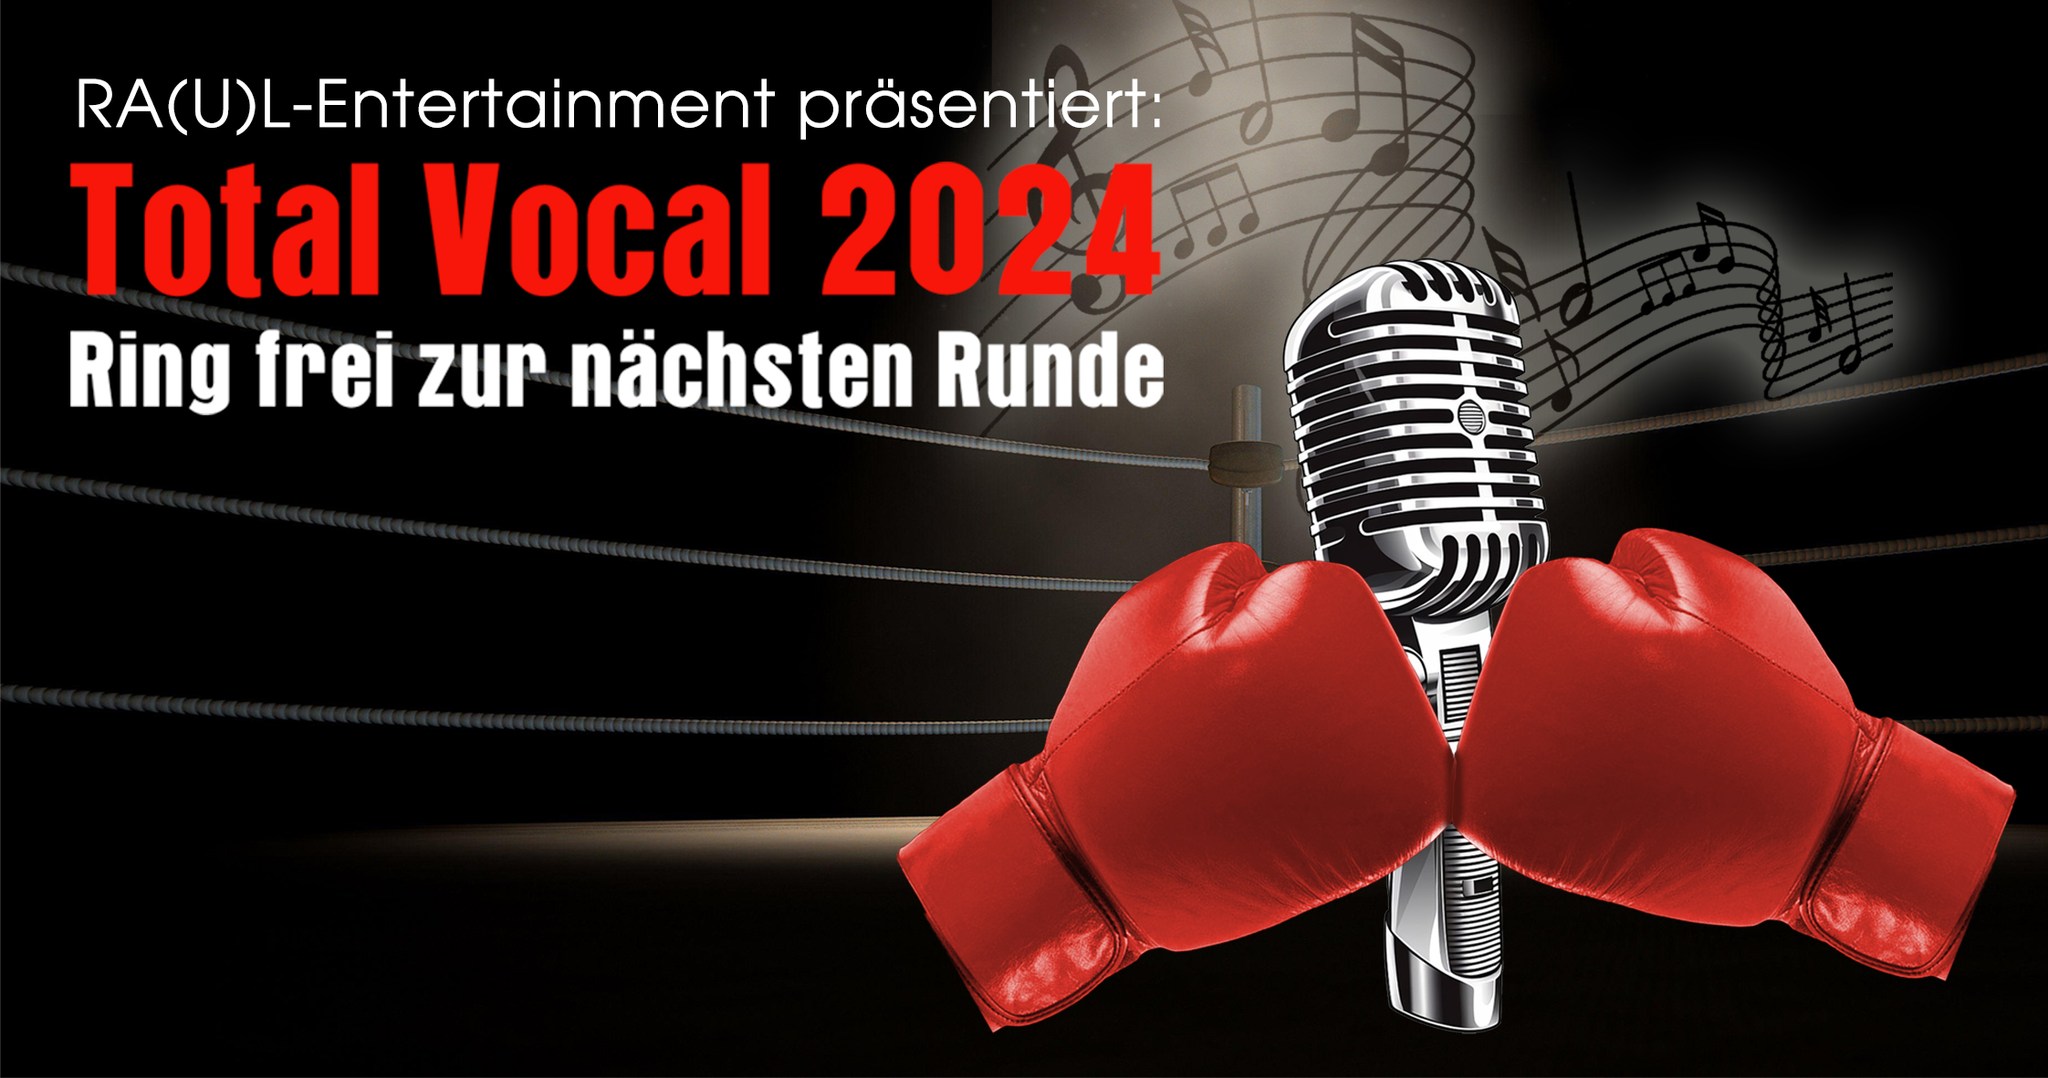 Raul Party Total Vocal 2024 Chemiefabrik Dresden